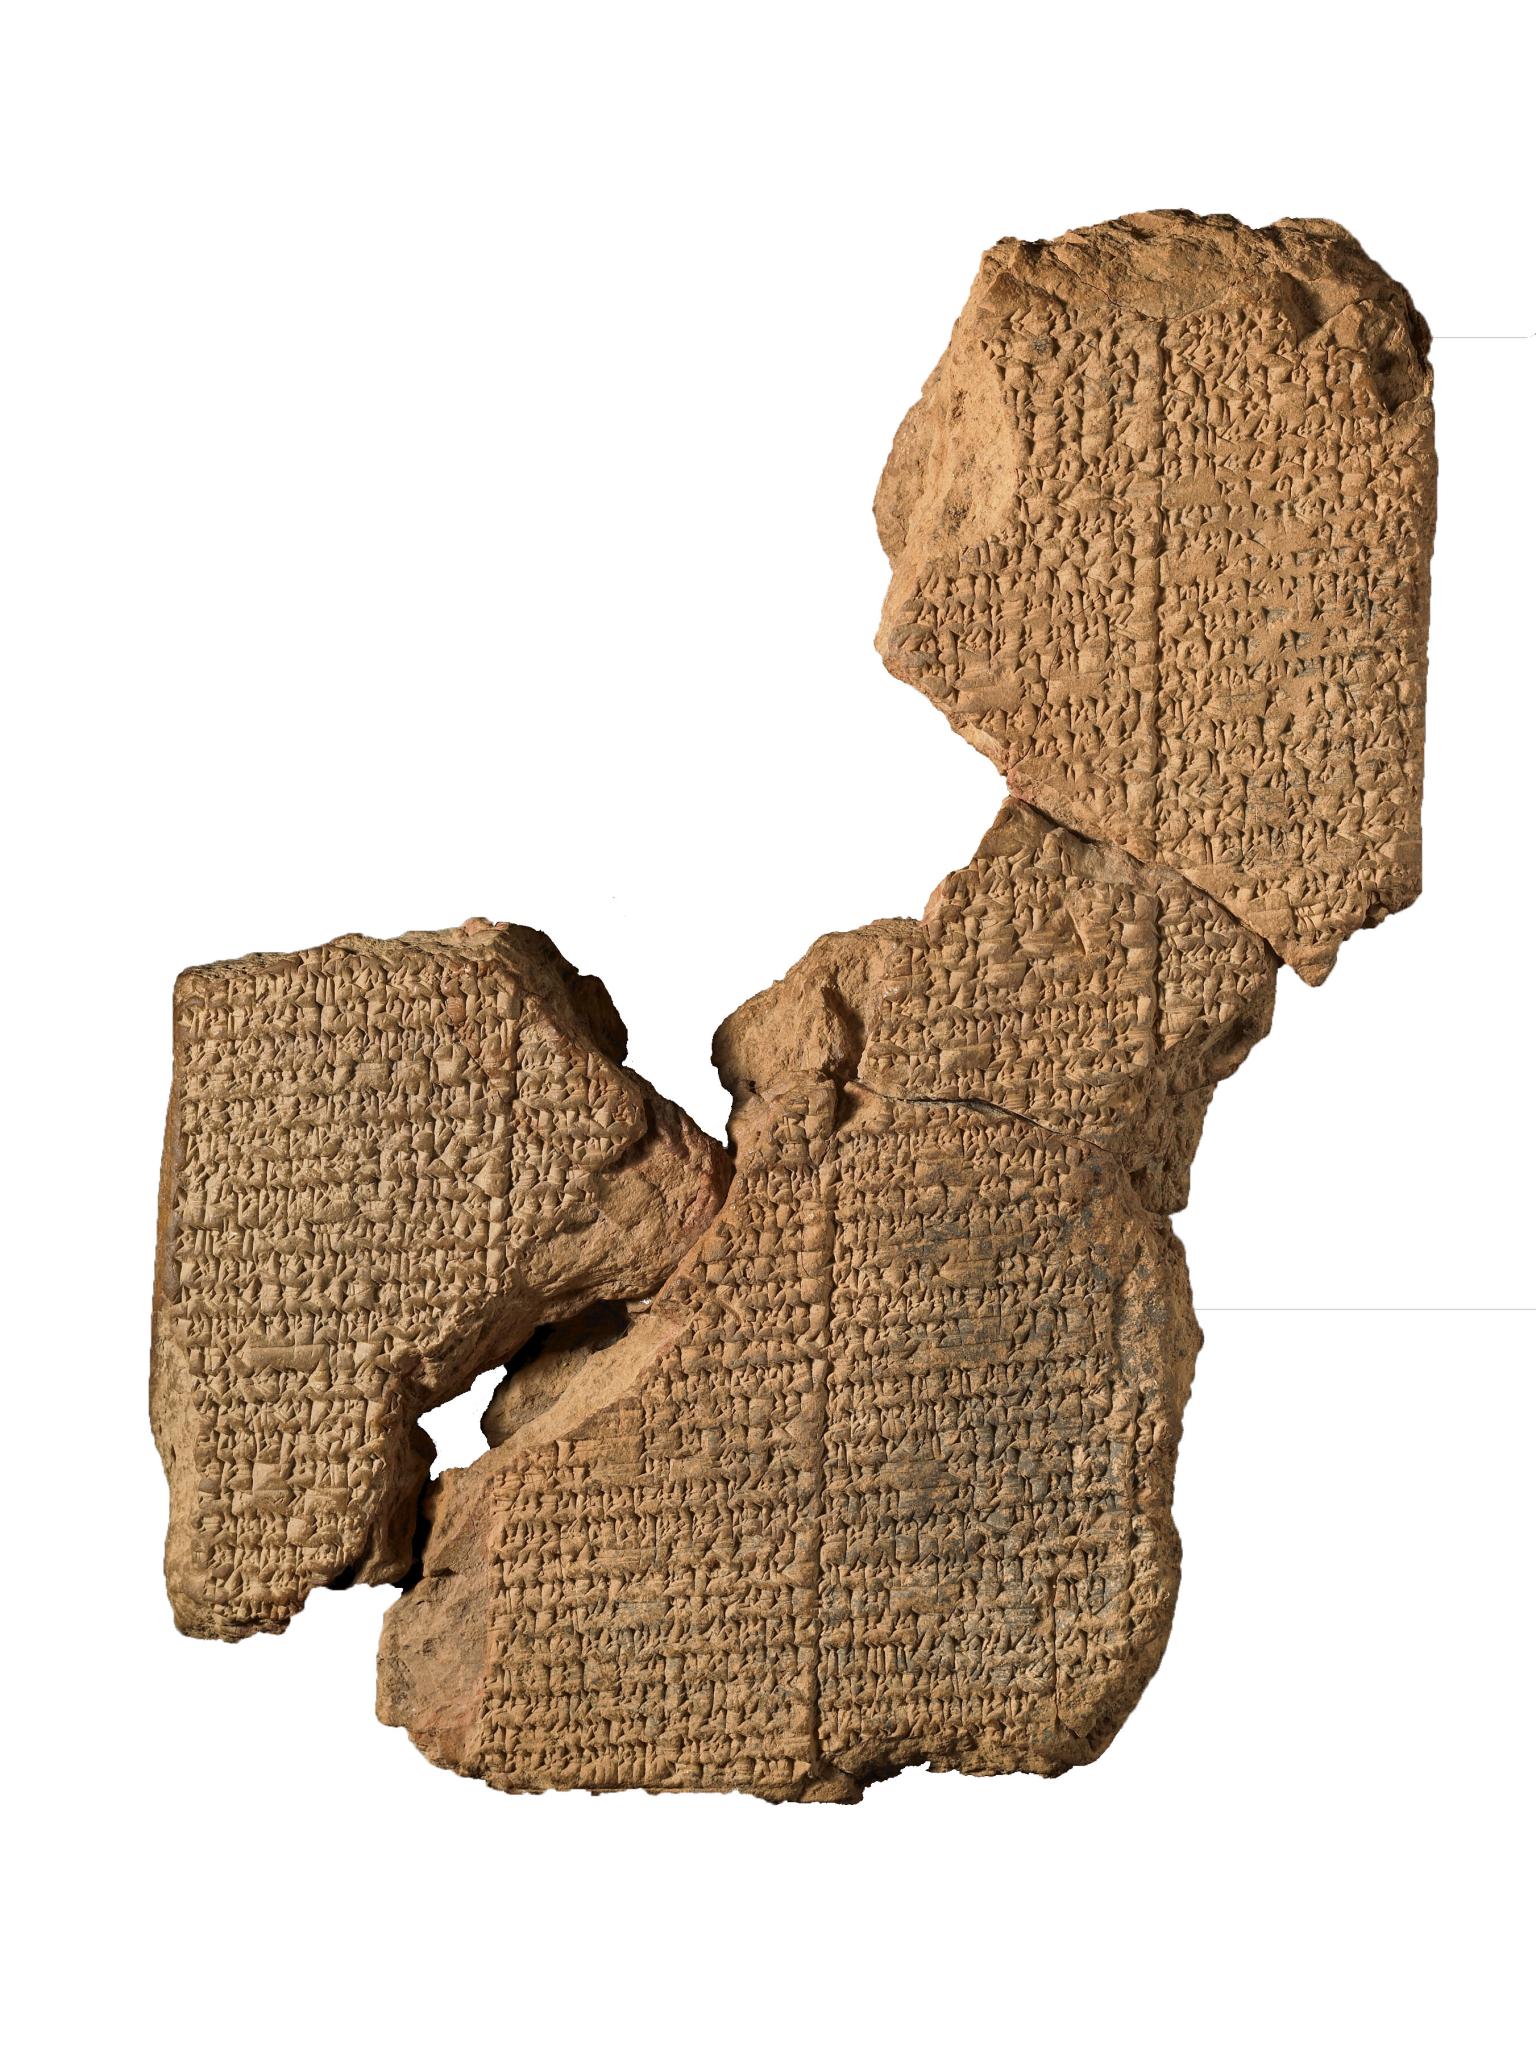 Clay tablet in several sections inscribed with Akkadian text.